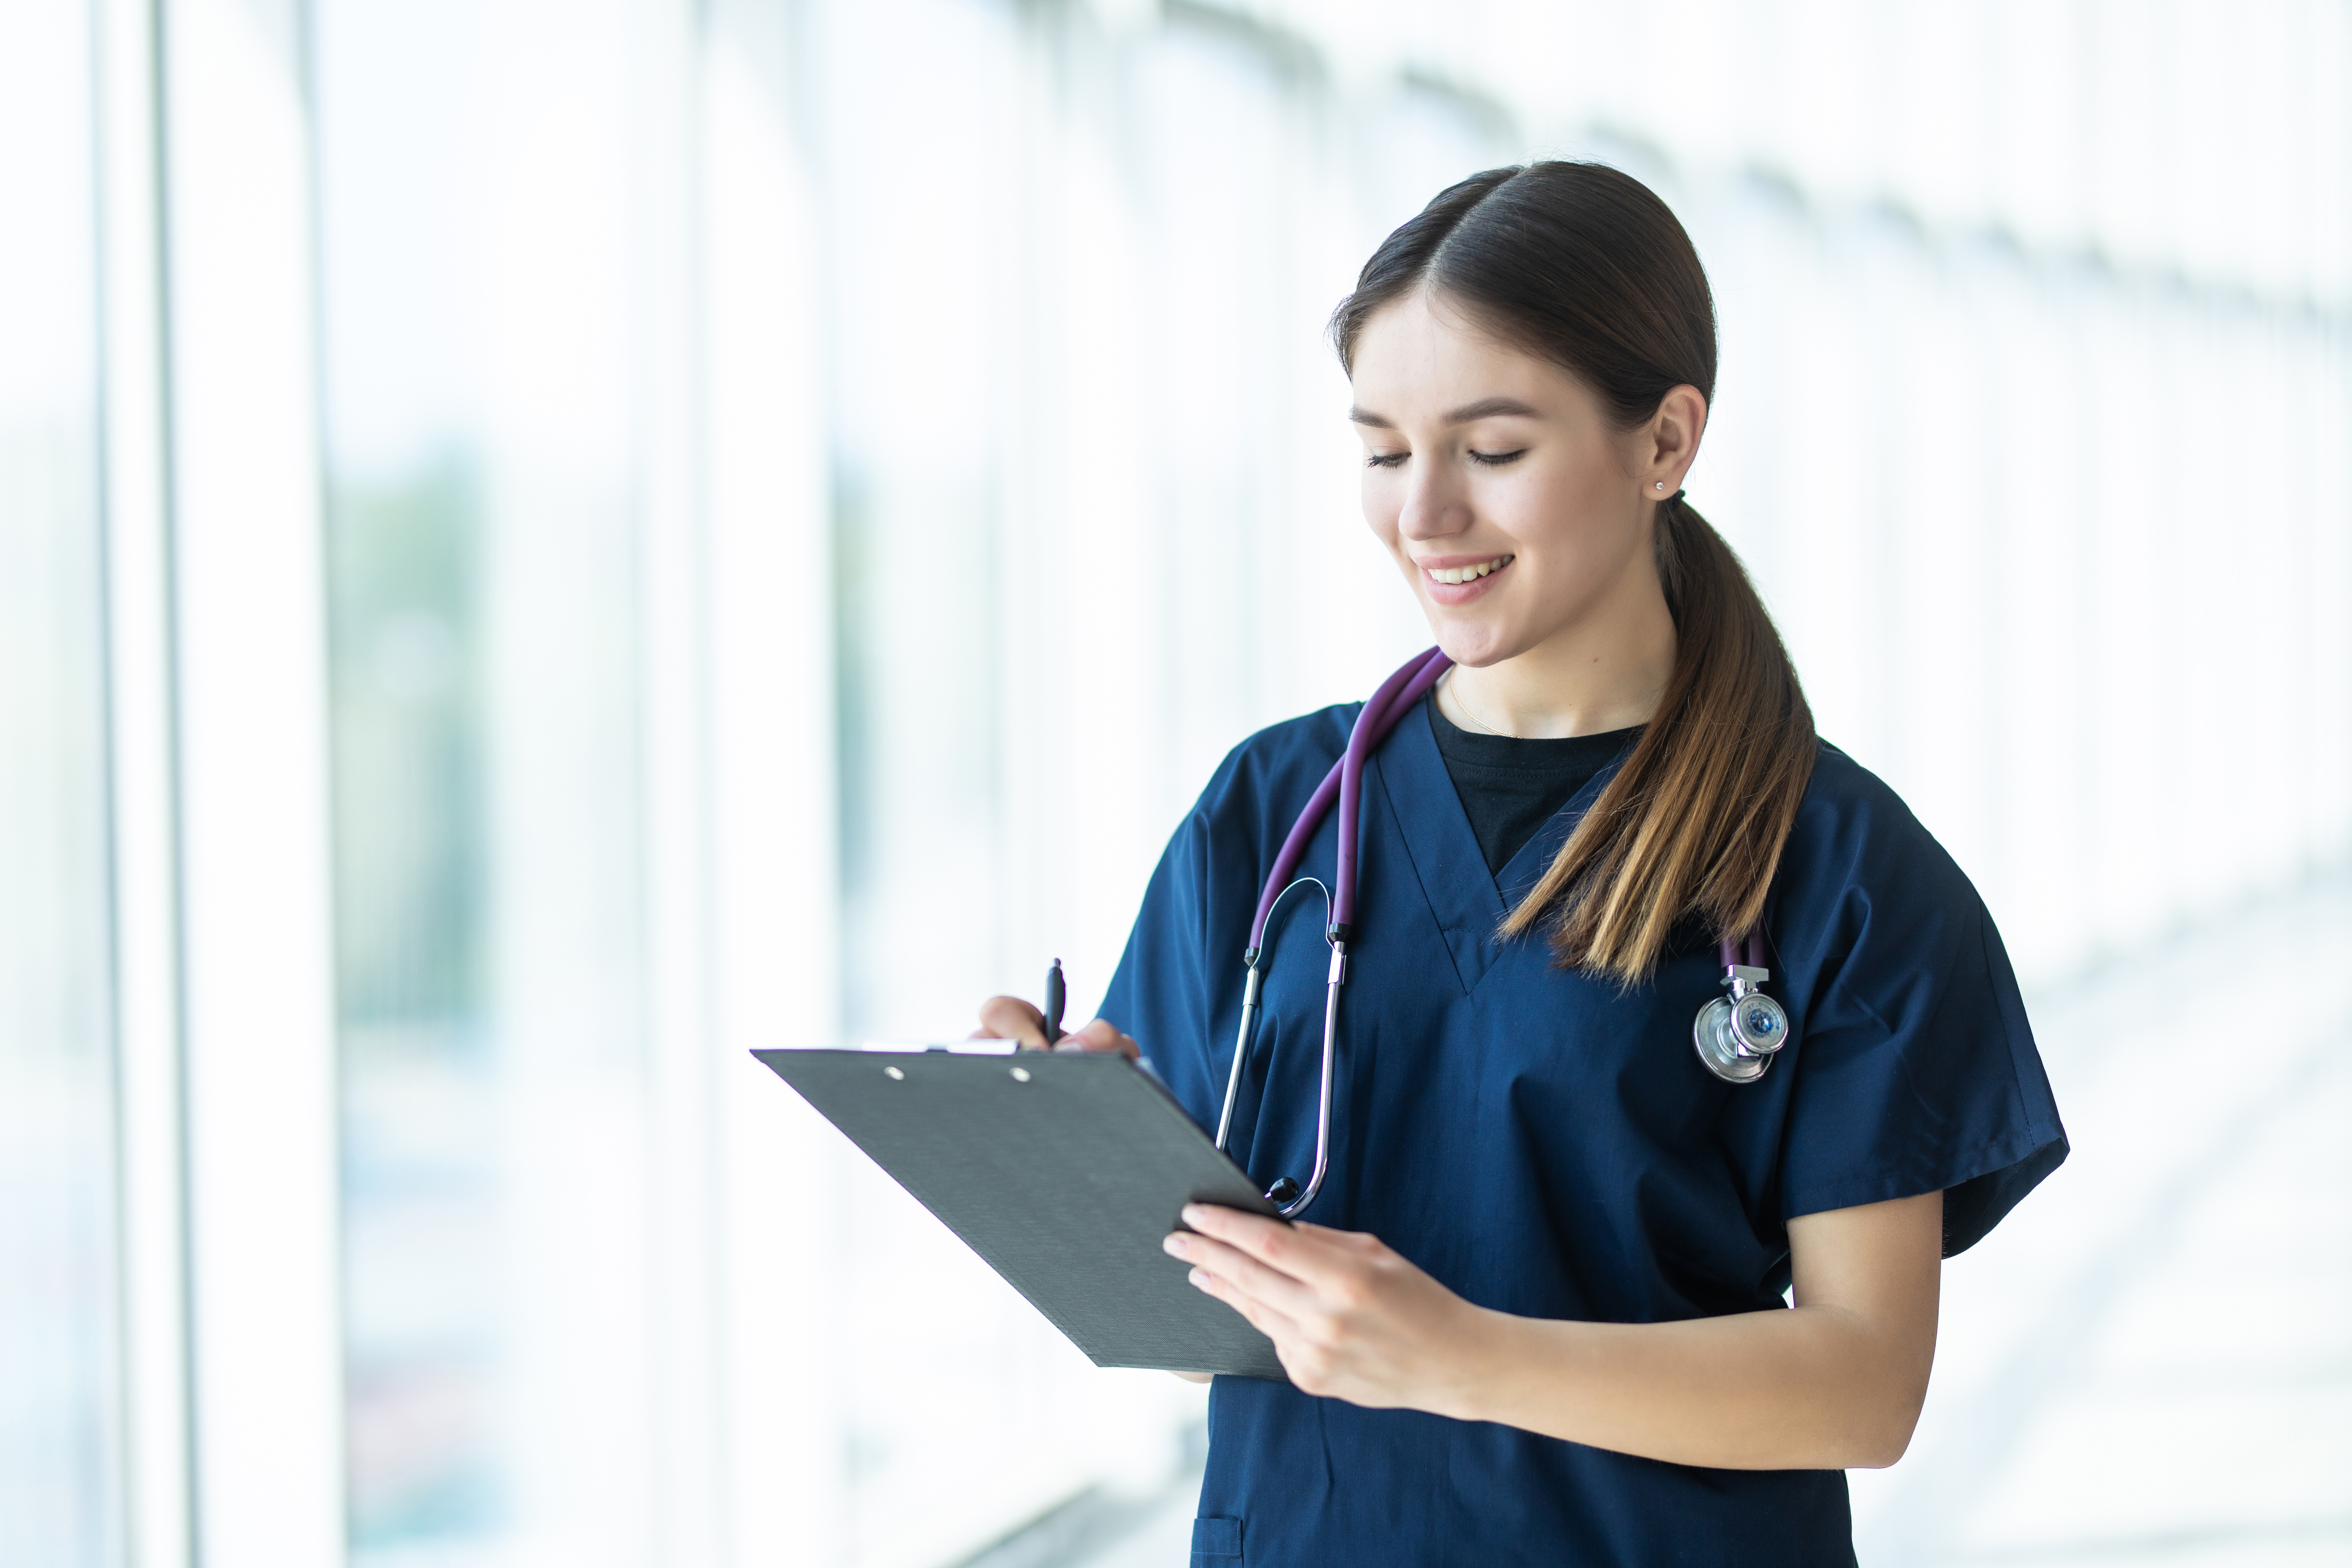 Smiling young female doctor holding a clipboard, healthcare concept